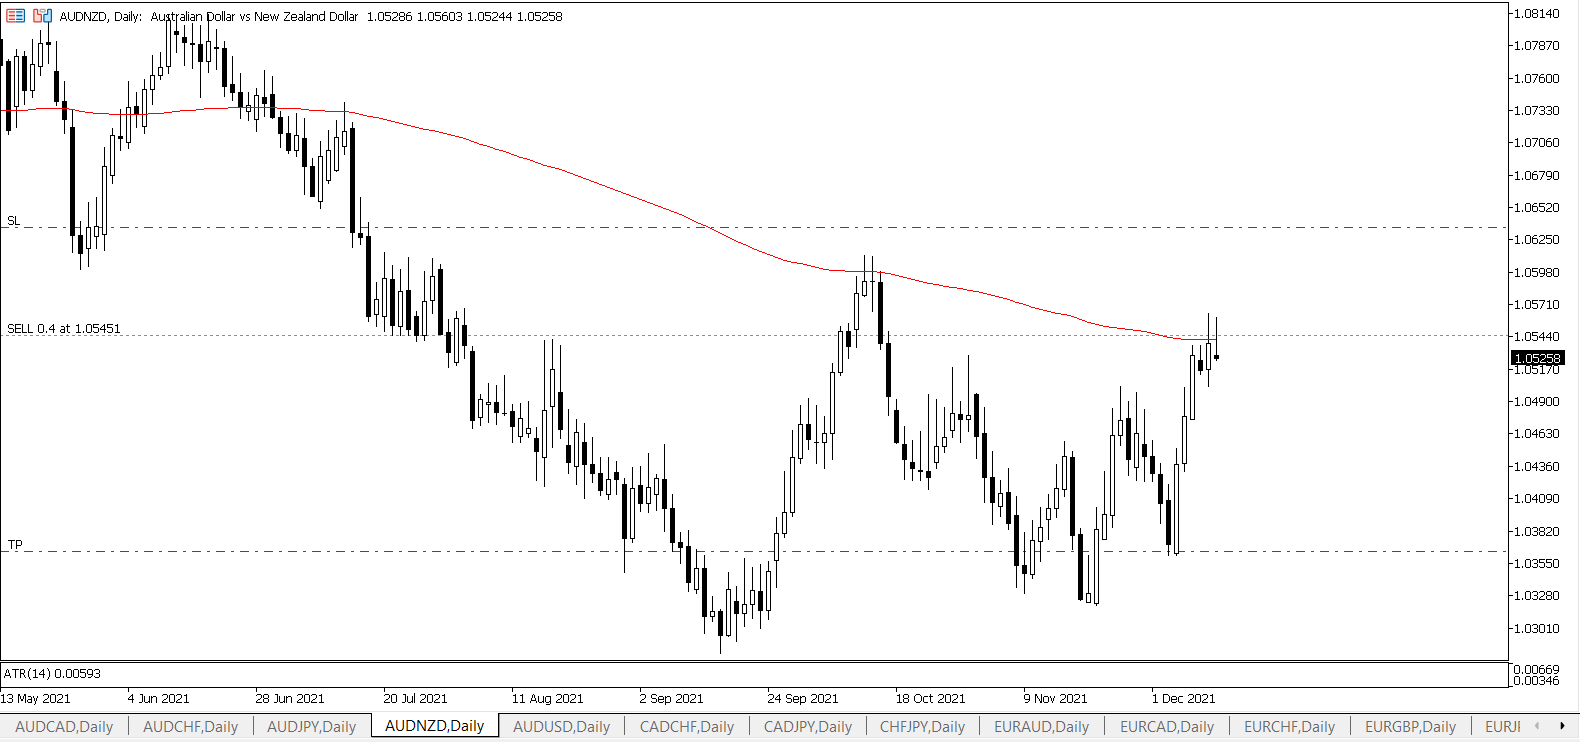 AUD/NZD D1 Price action and 200 EMA